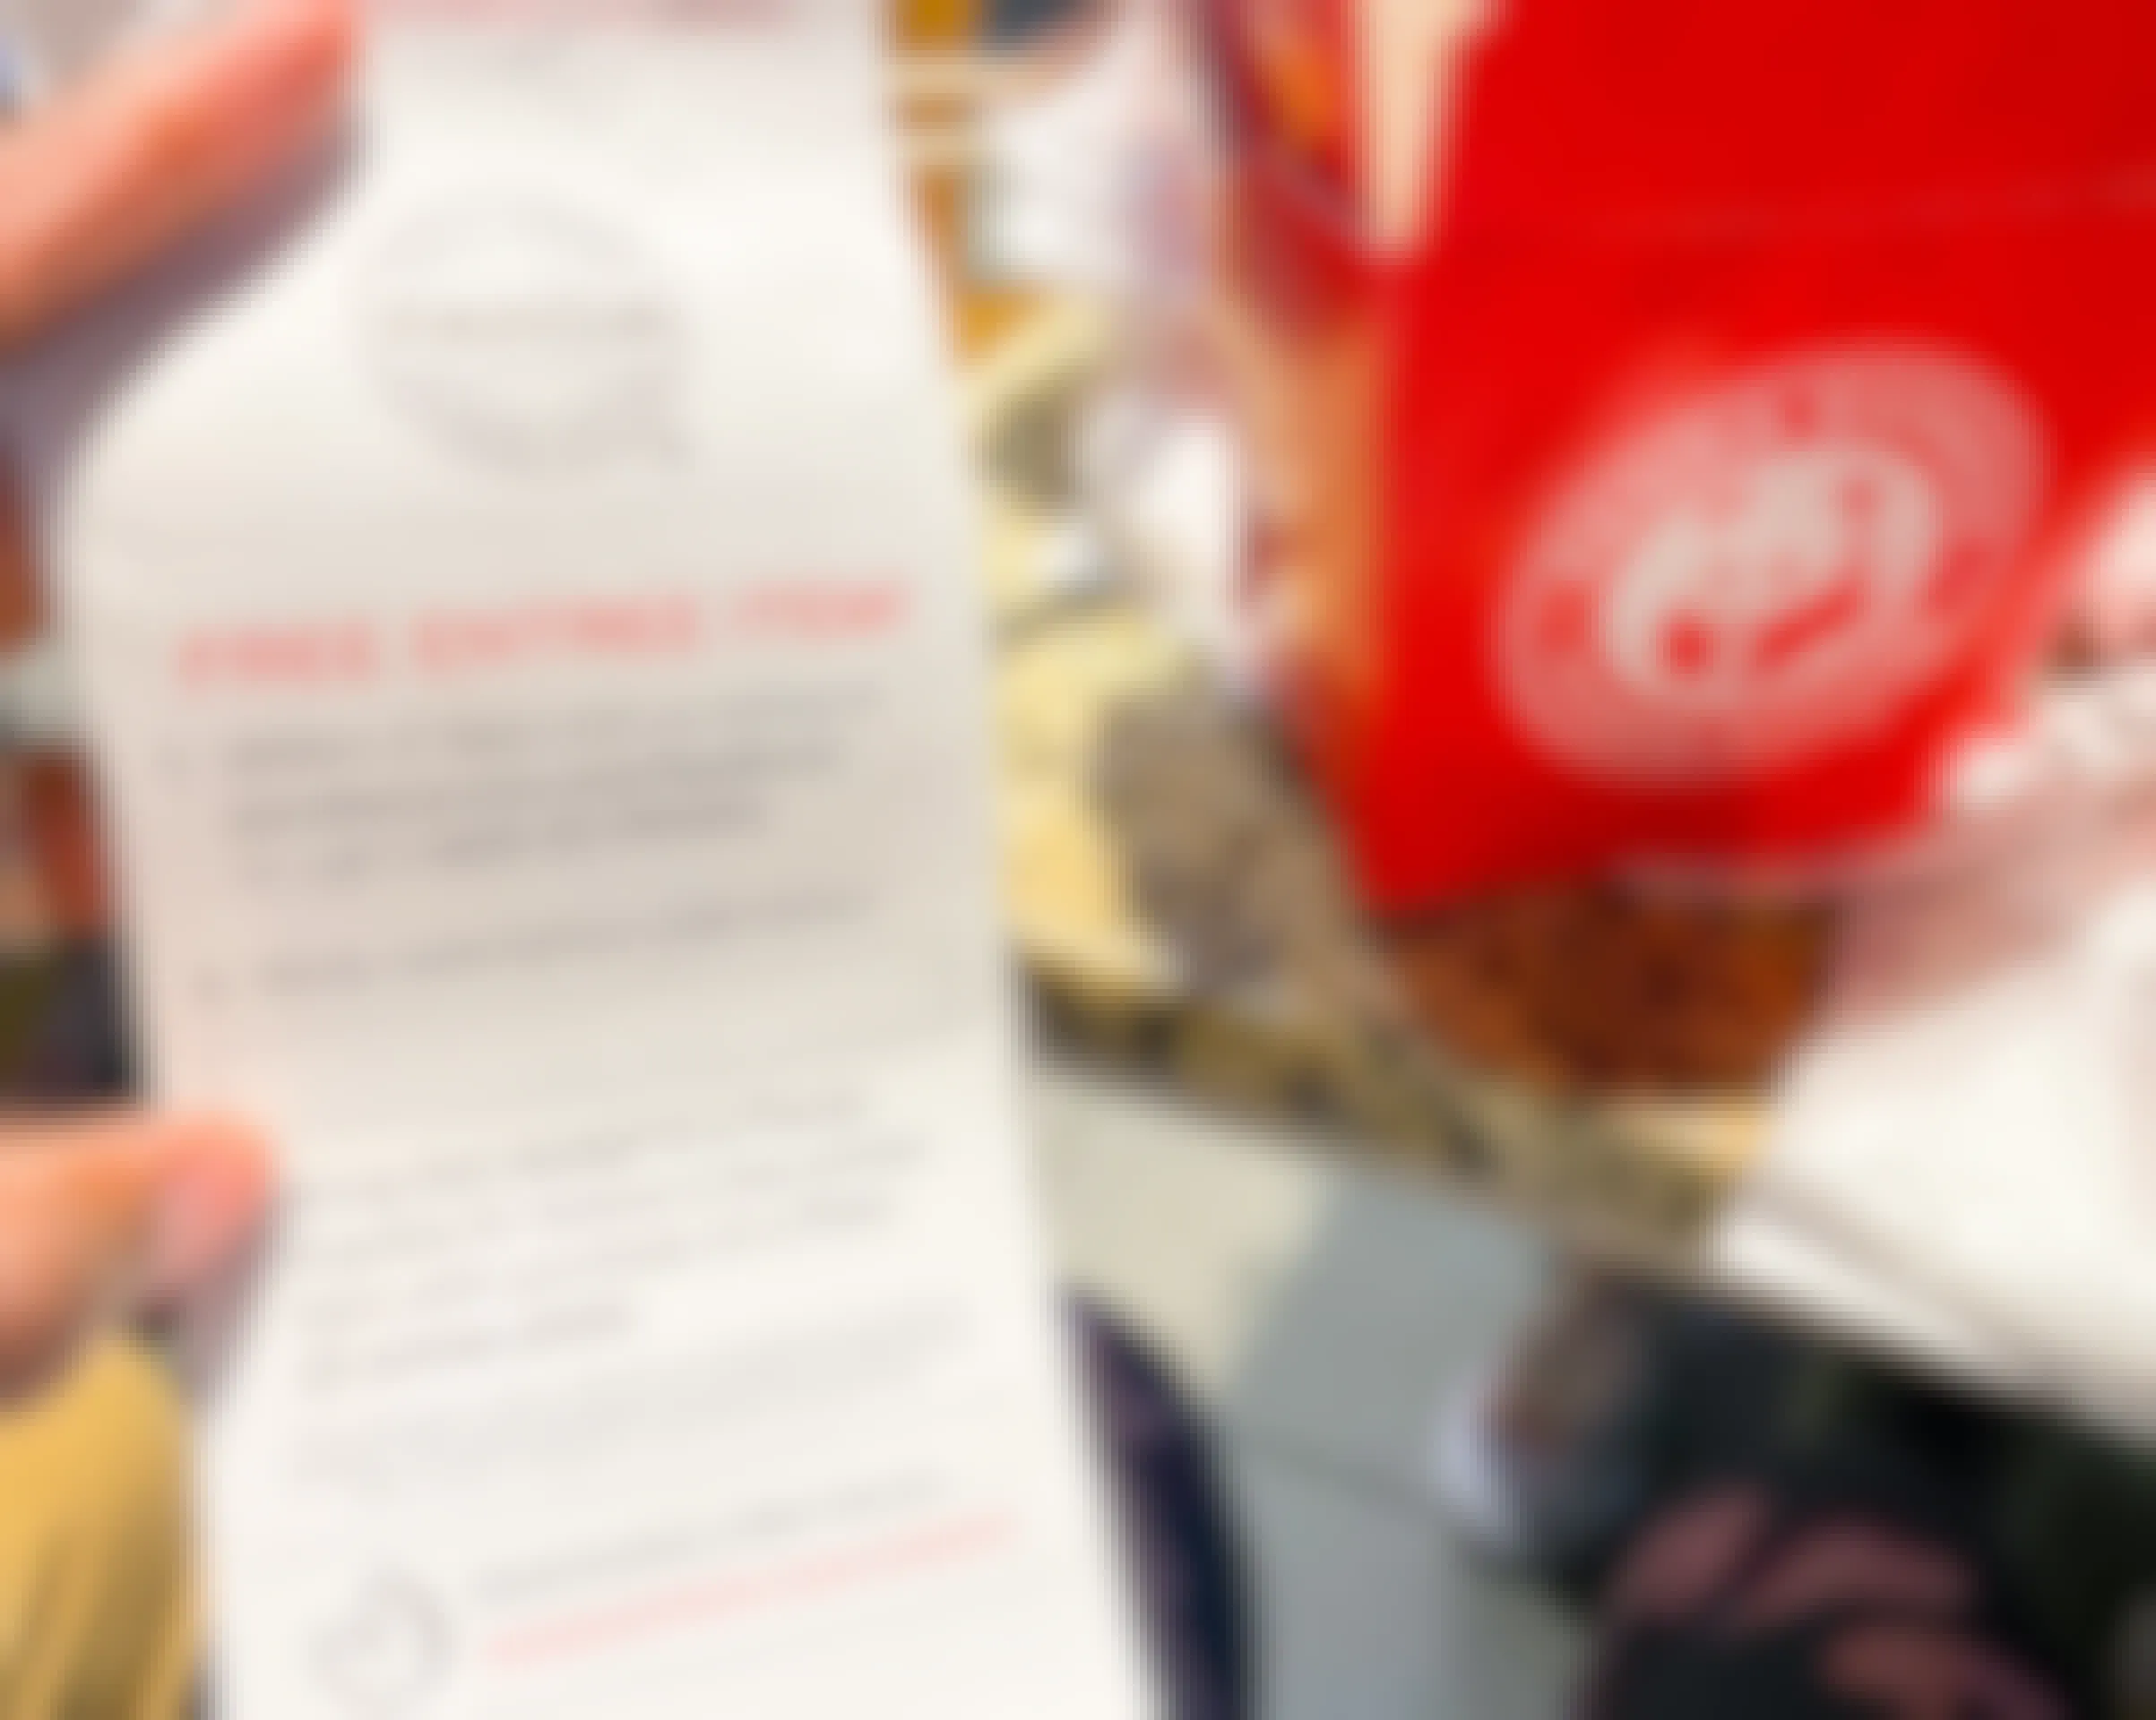 Someone holding a Panda Express receipt showing the survey offer for a free entree